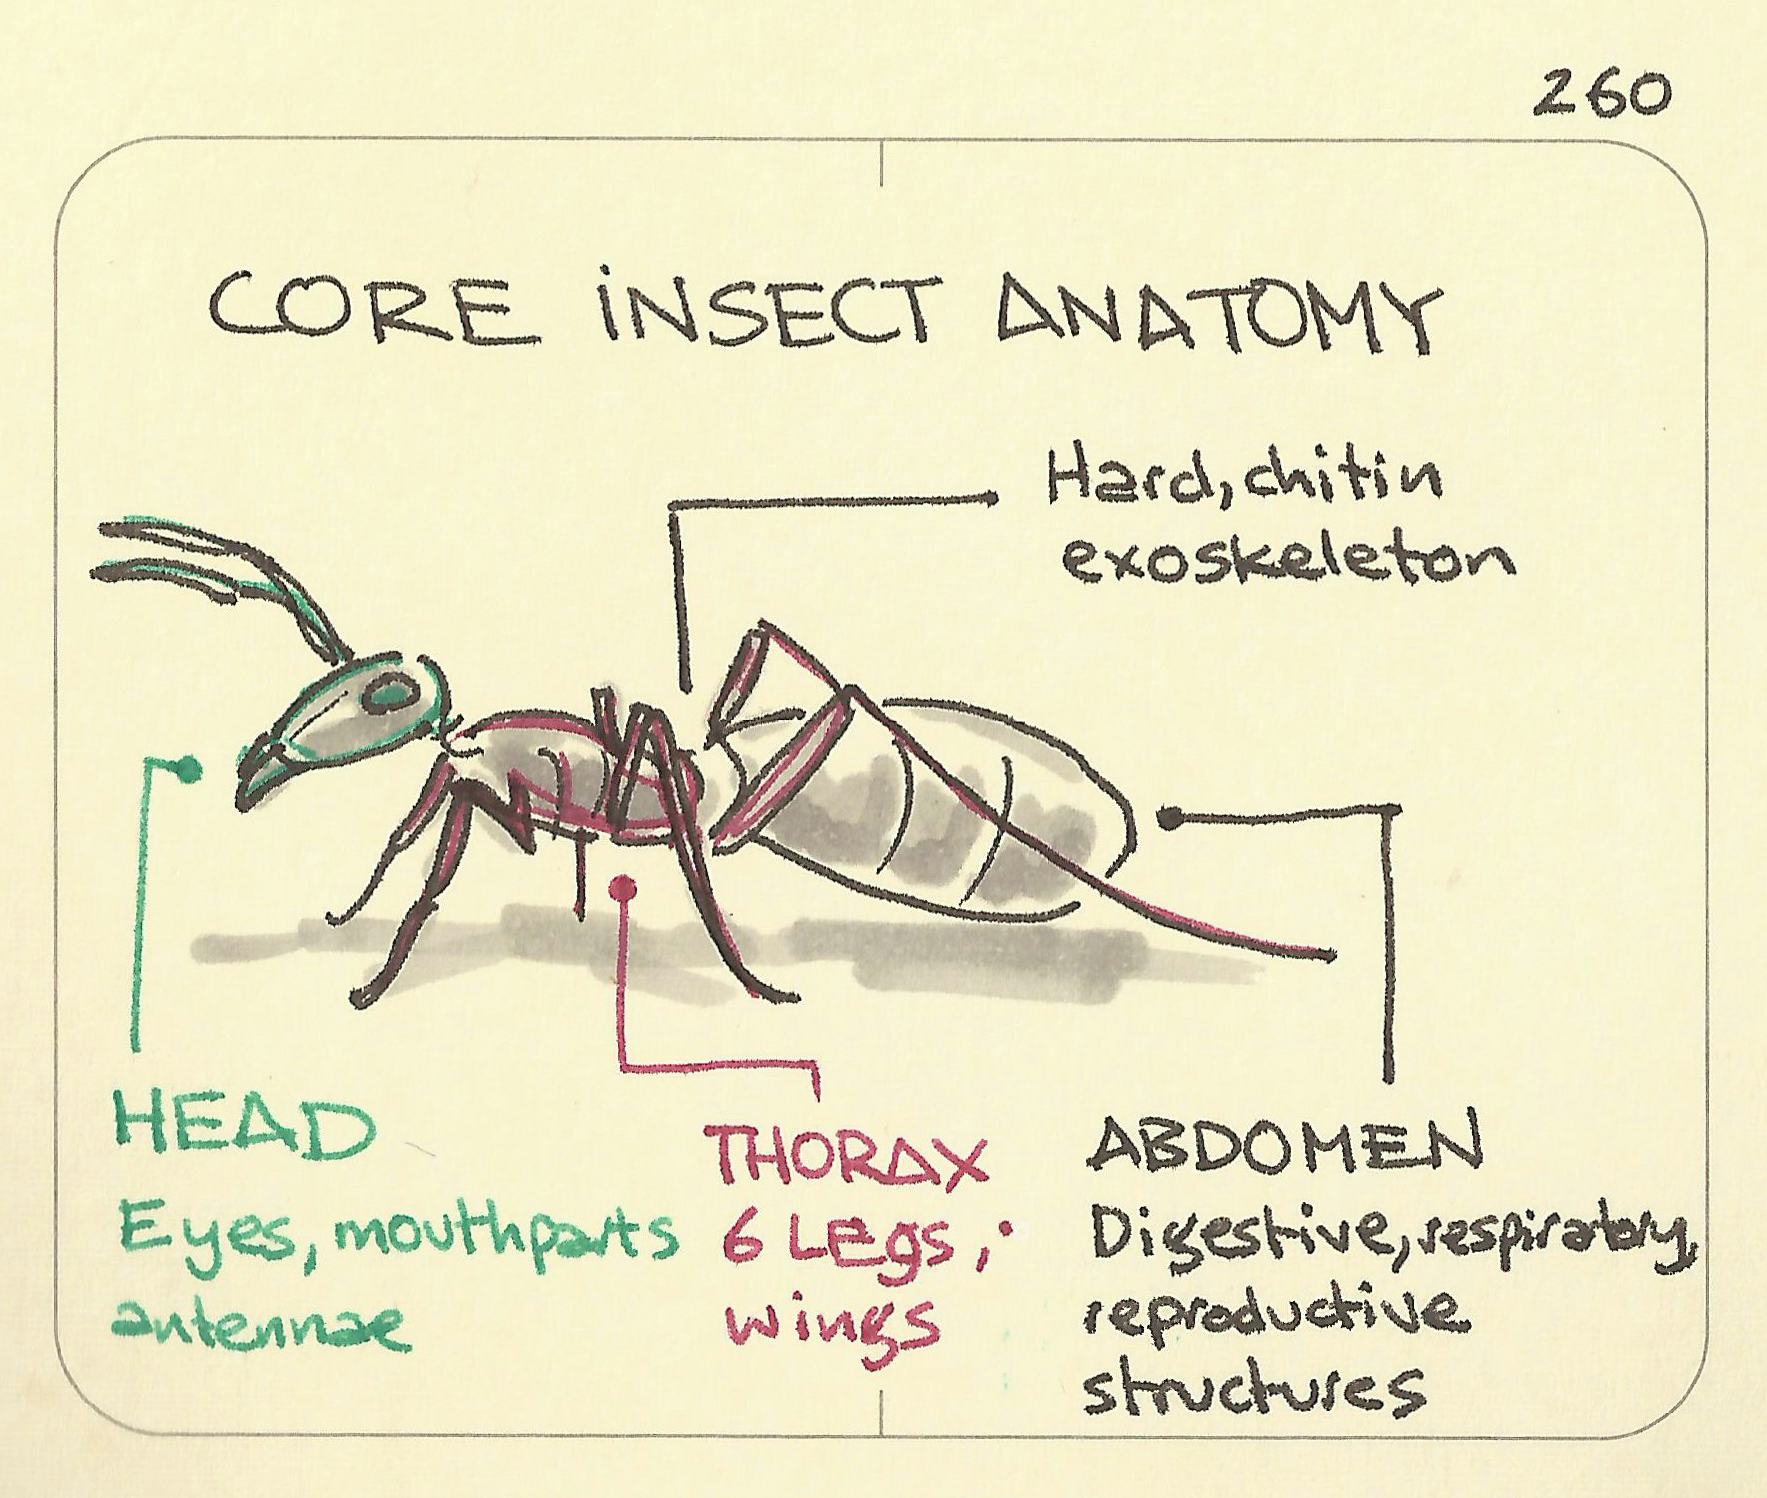 Core insect anatomy - Sketchplanations